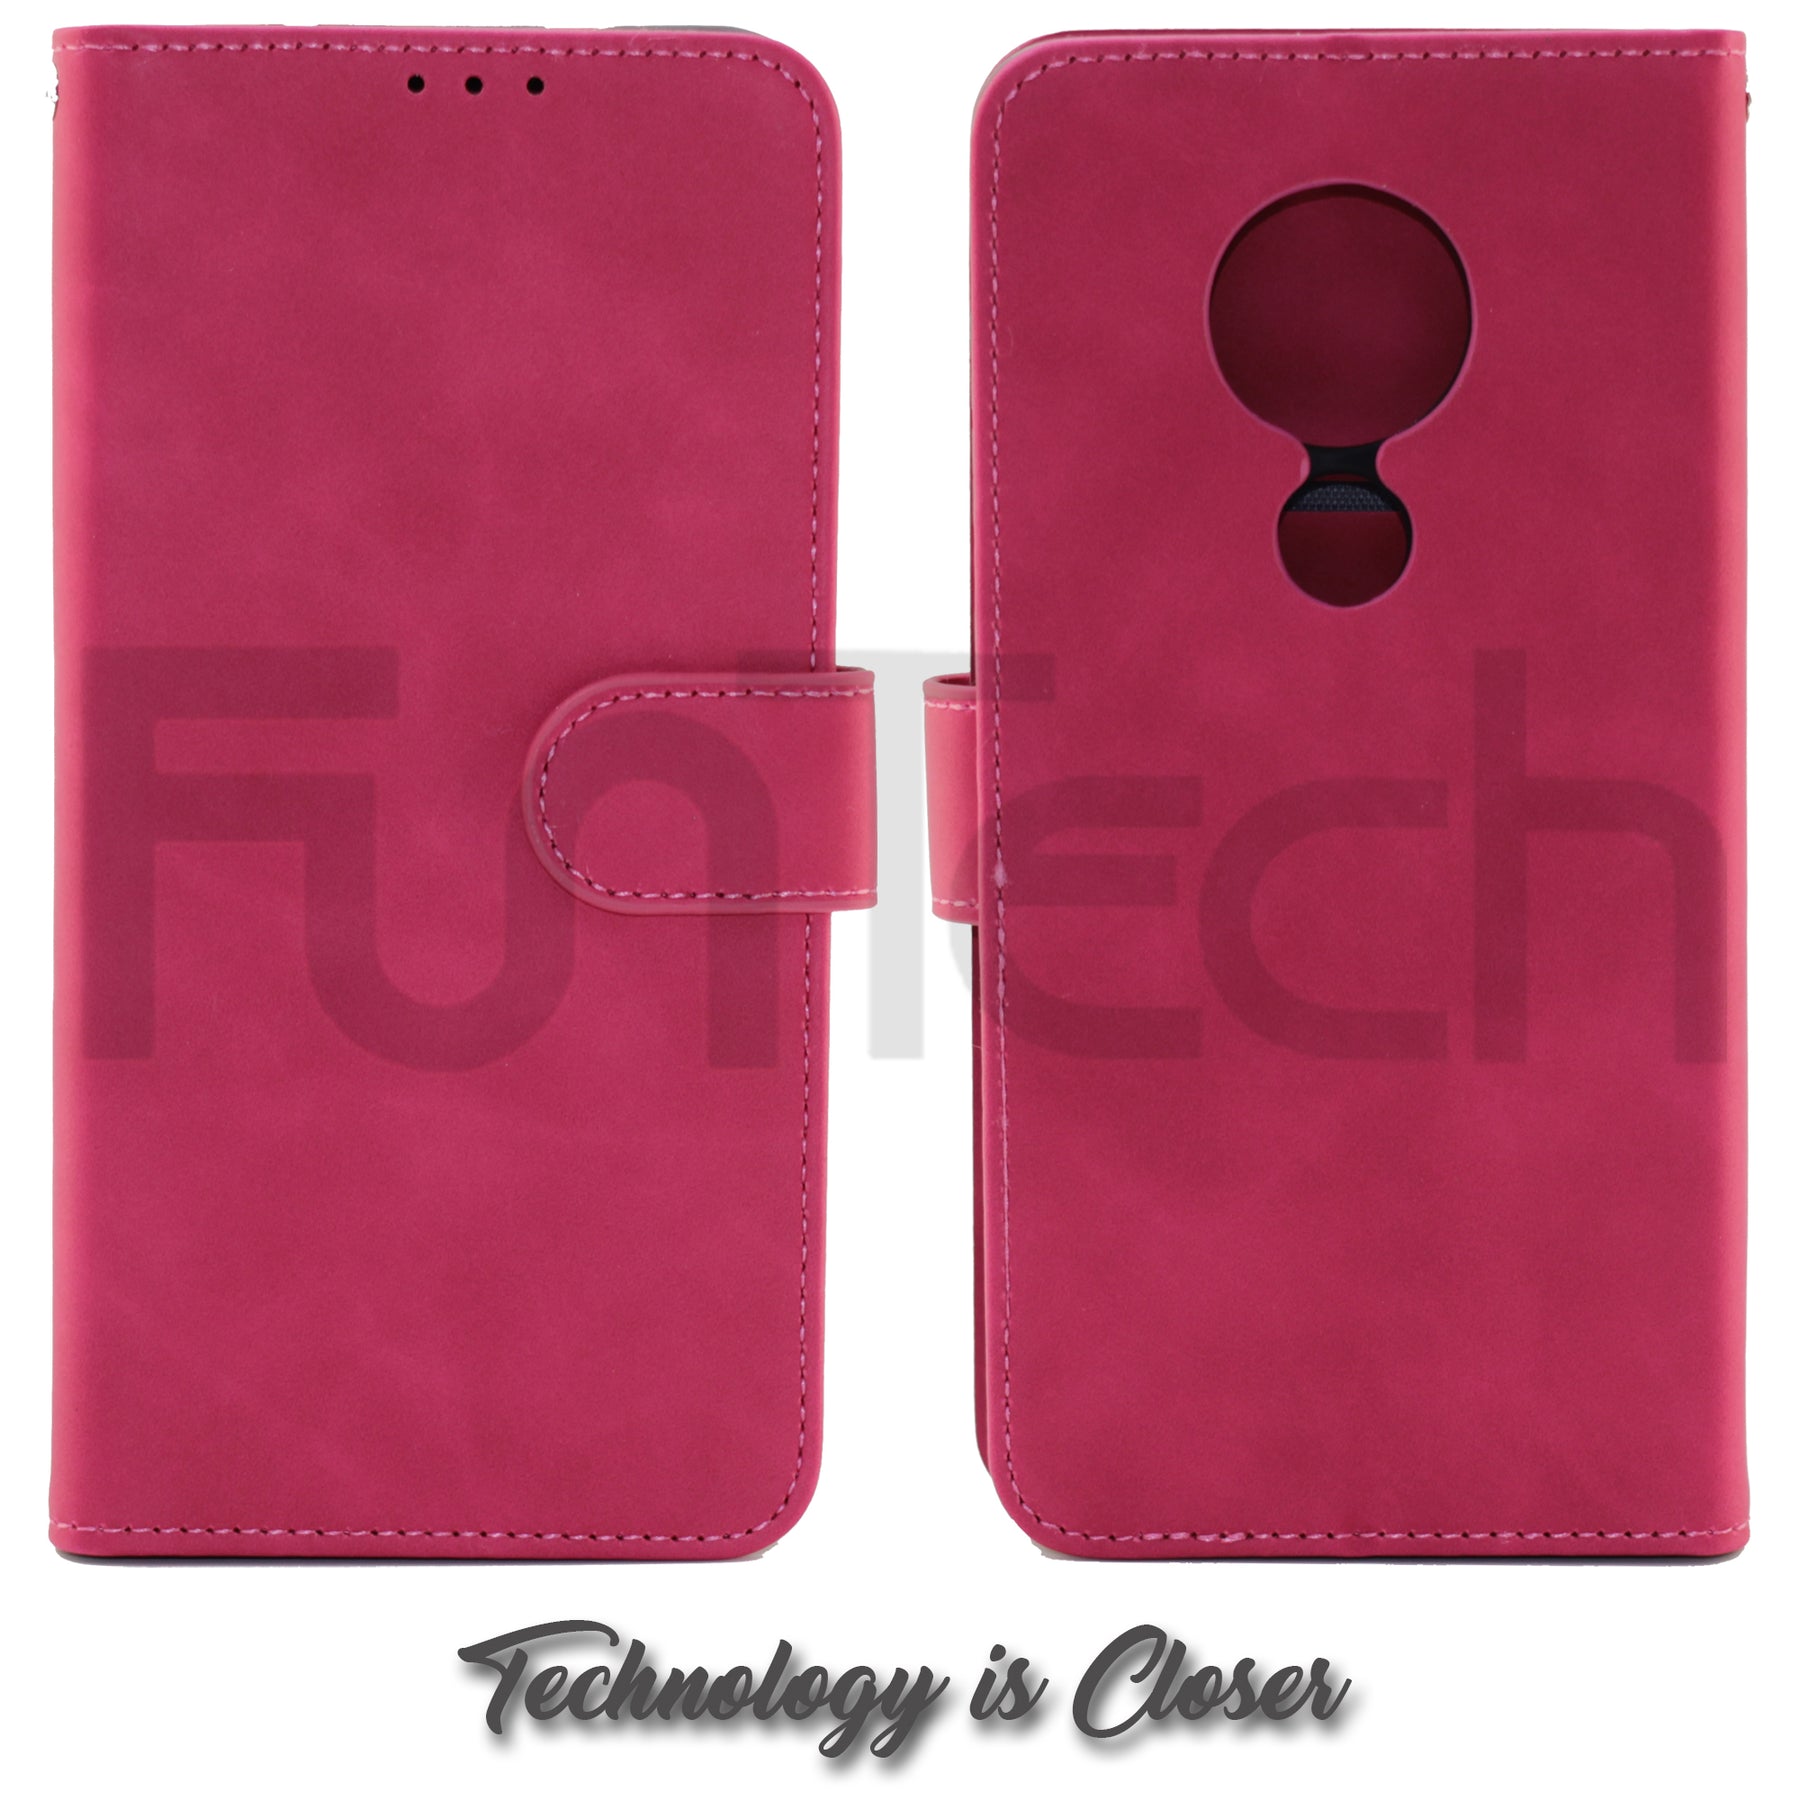 Nokia 6.2 / 7.2 Leather Wallet Case, Color Red,